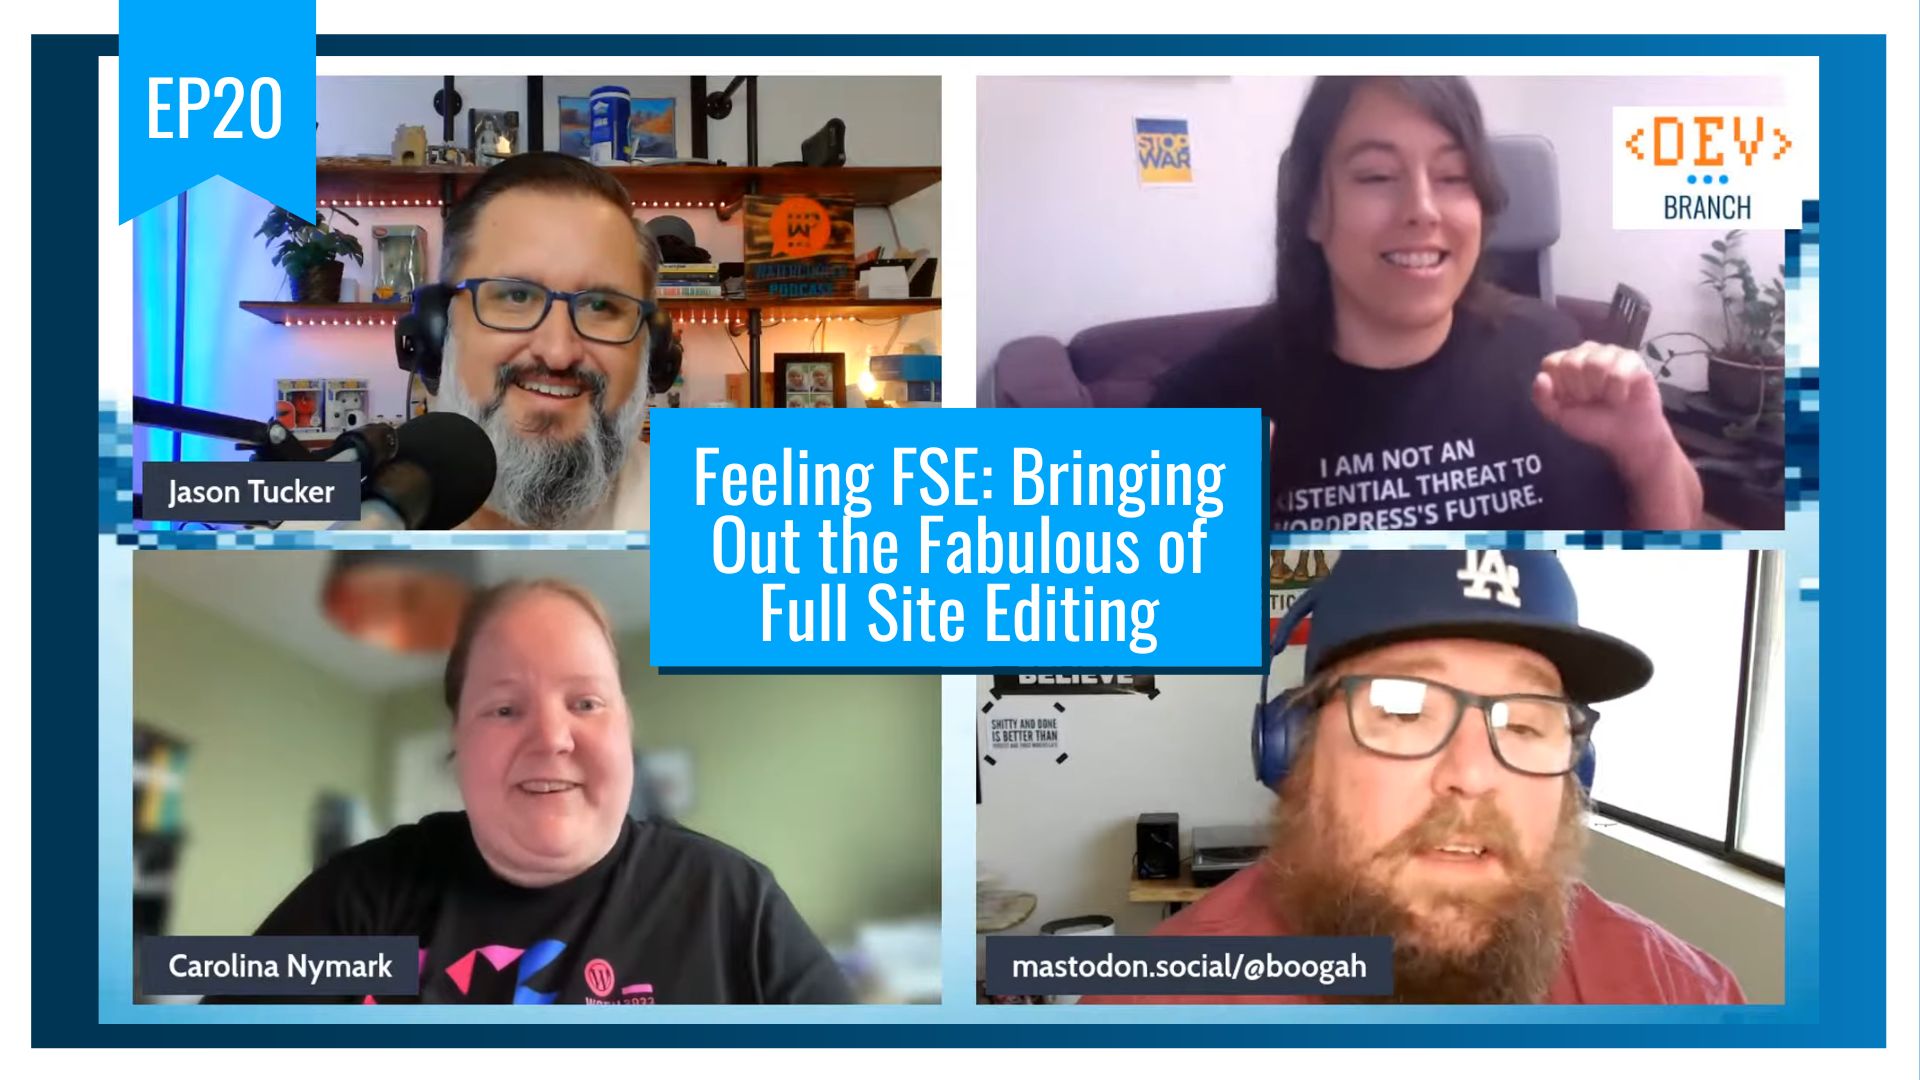 EP20 – Feeling FSE: Bringing Out the Fabulous of Full Site Editing